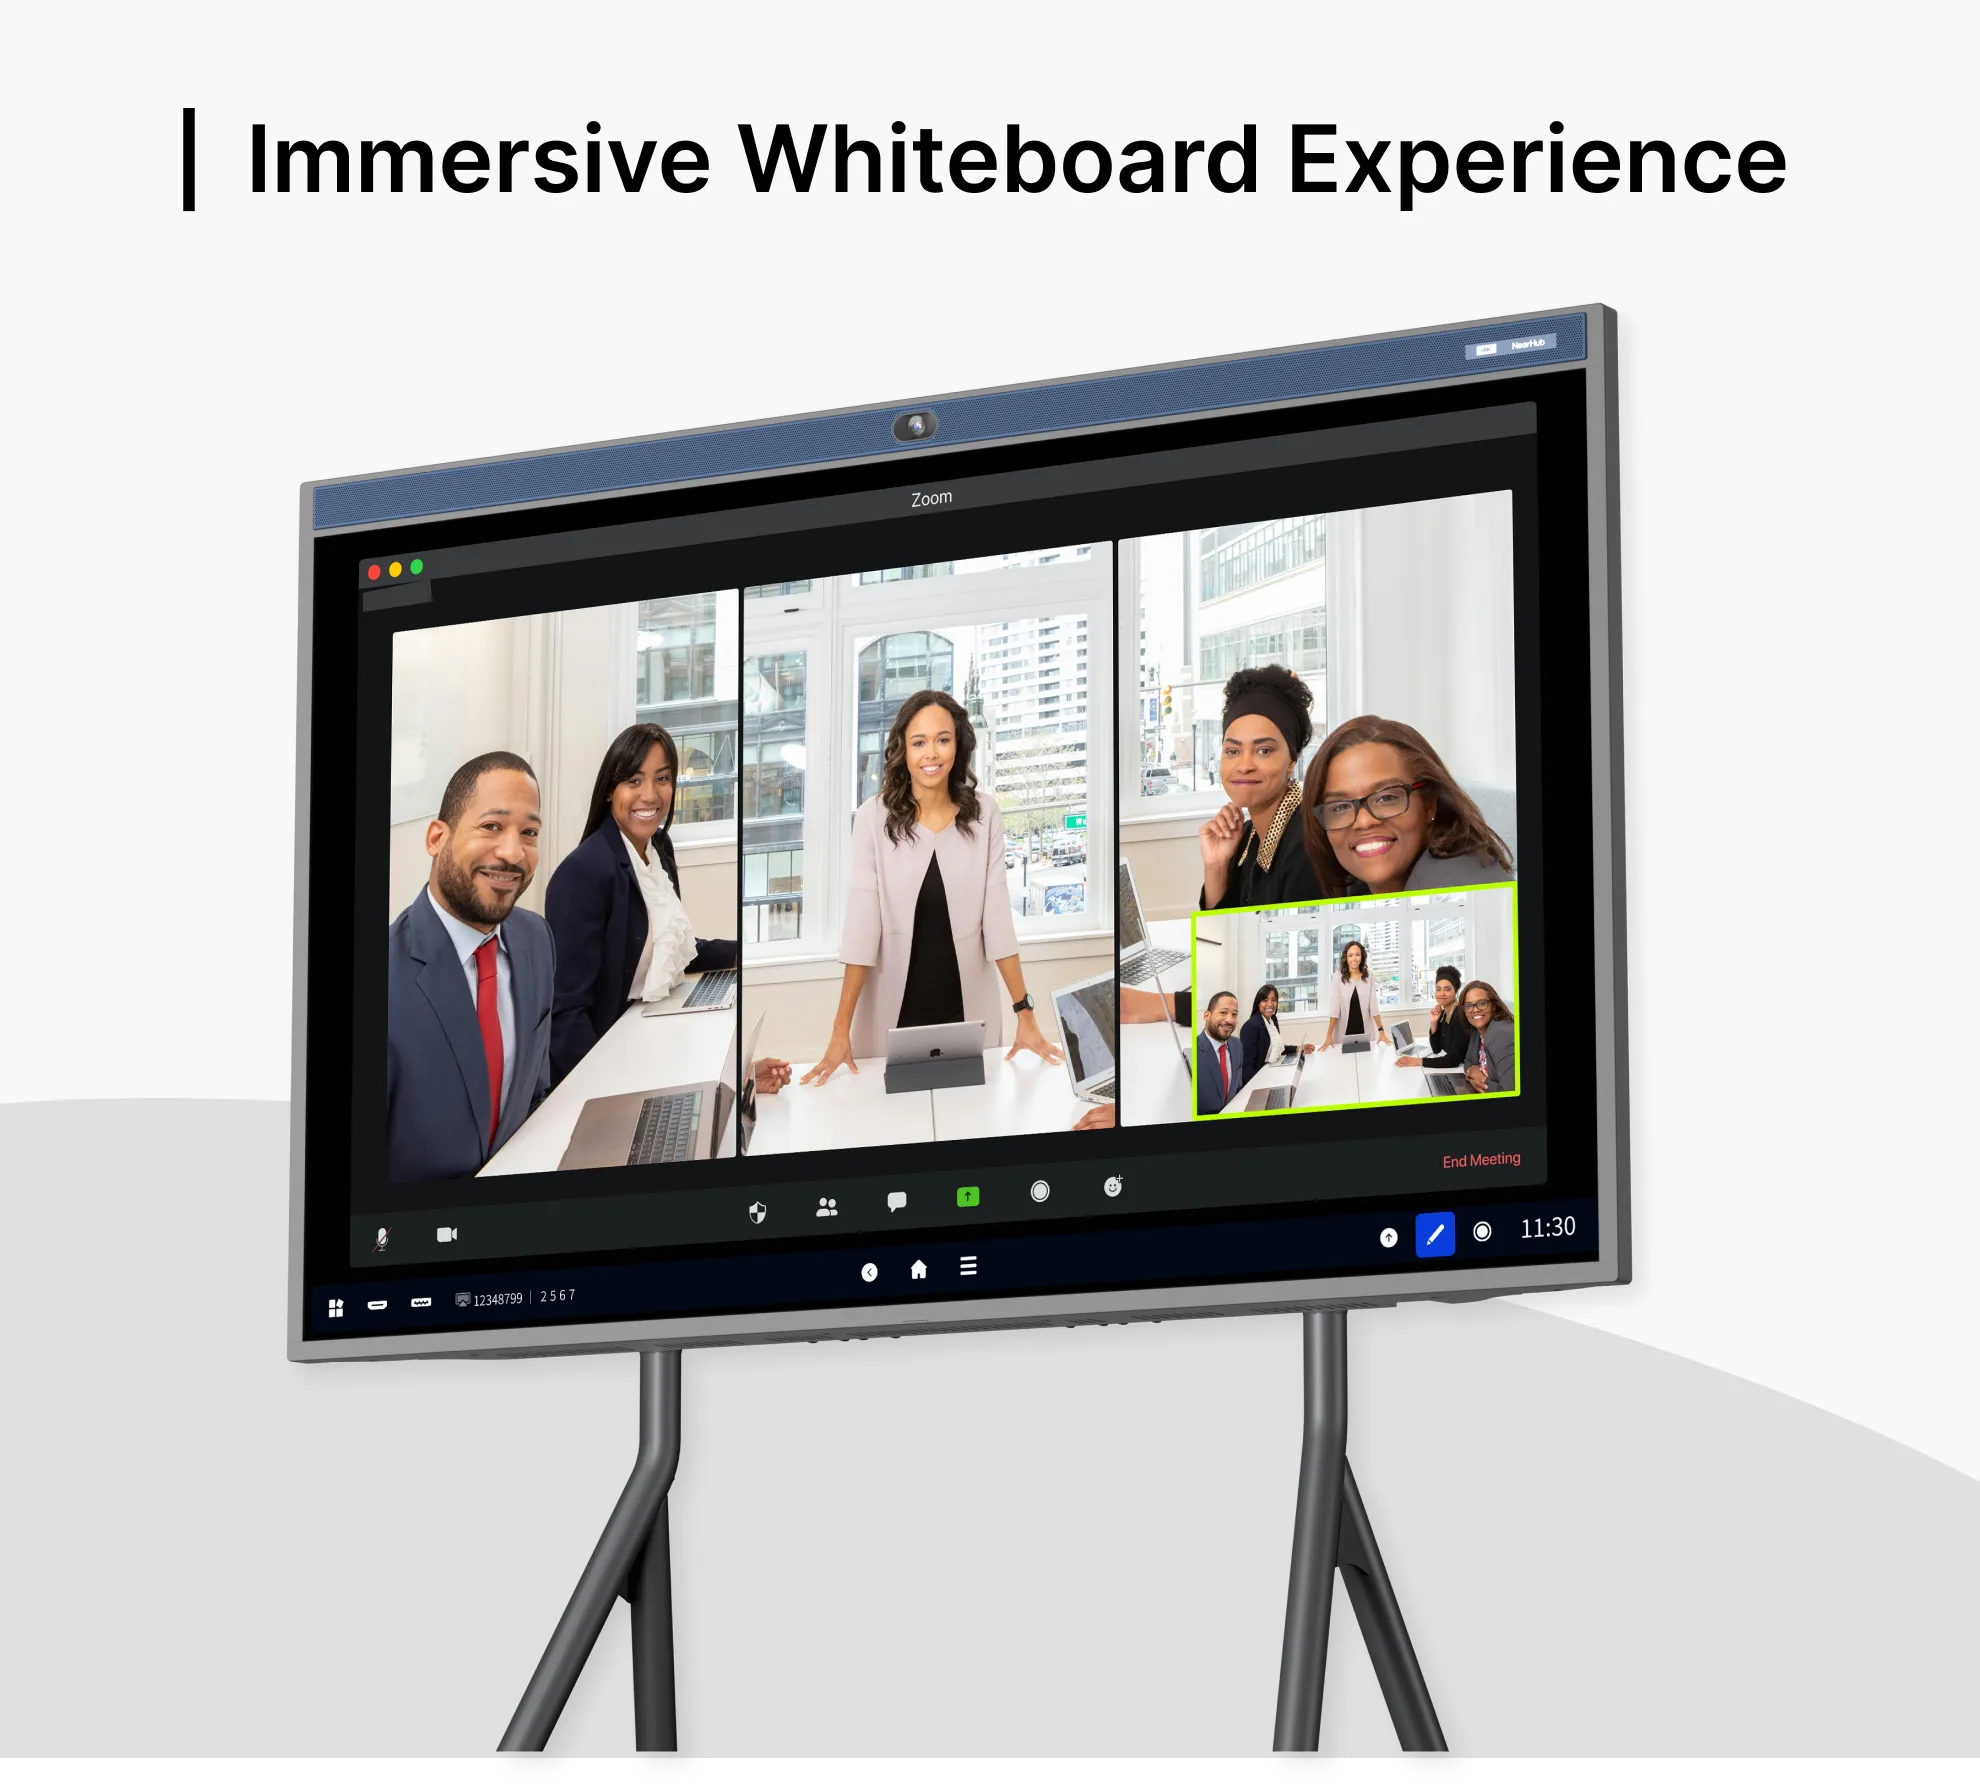 Immersive Whiteboard Experience